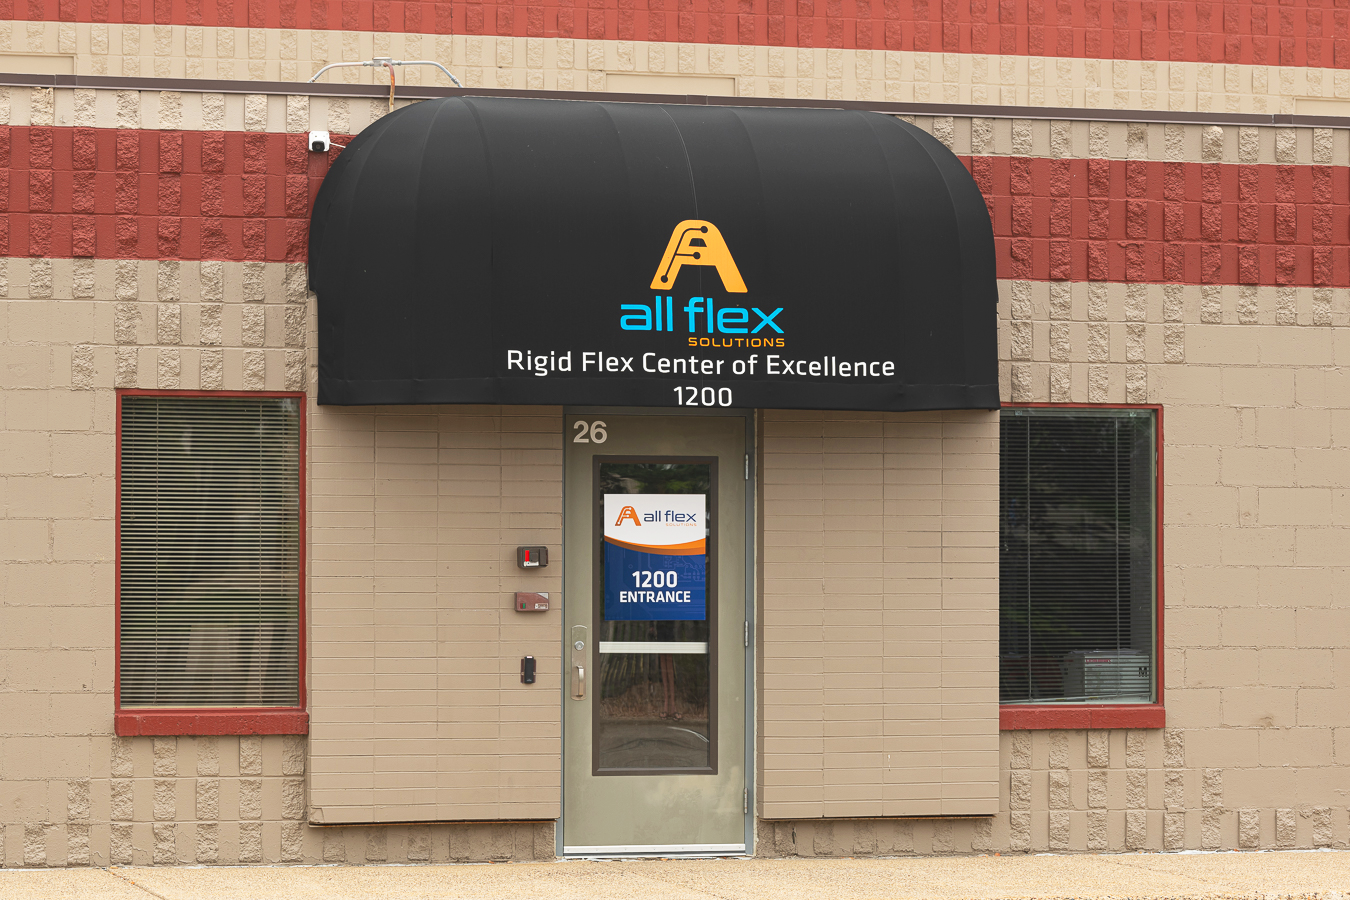 The front entry of the Northfield, MN All Flex Location